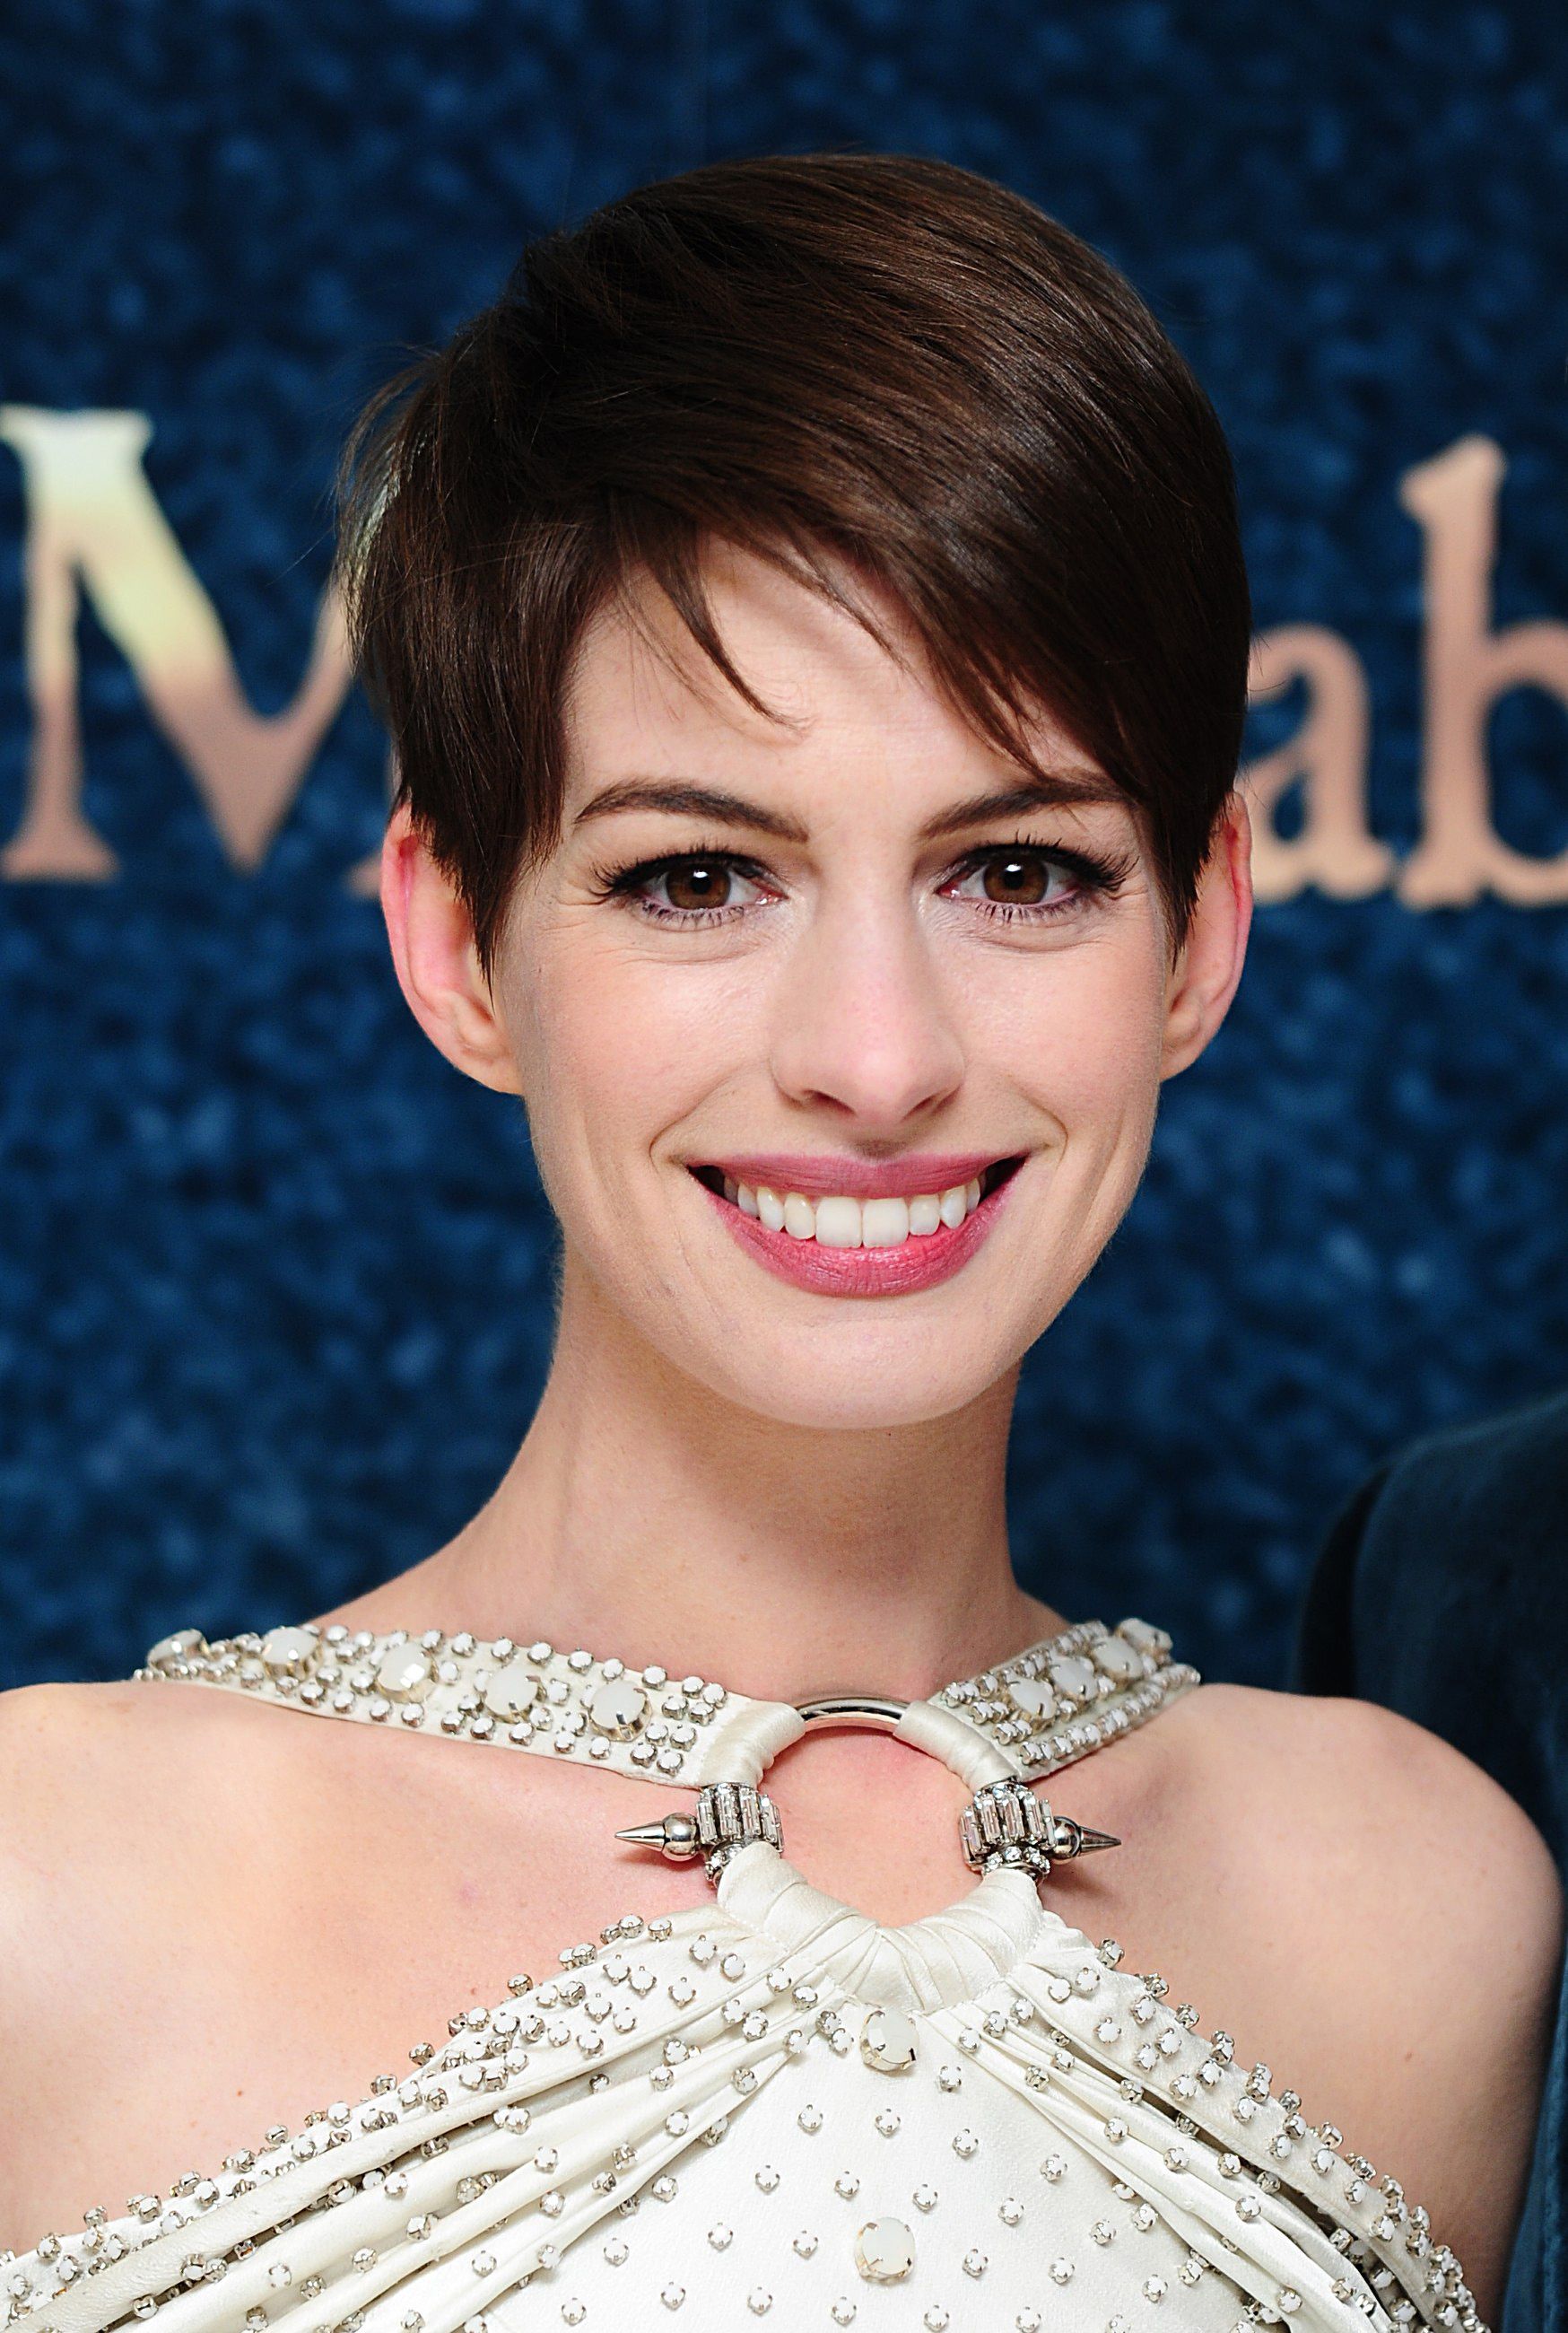 Anne Hathaway just debuted a red hair color